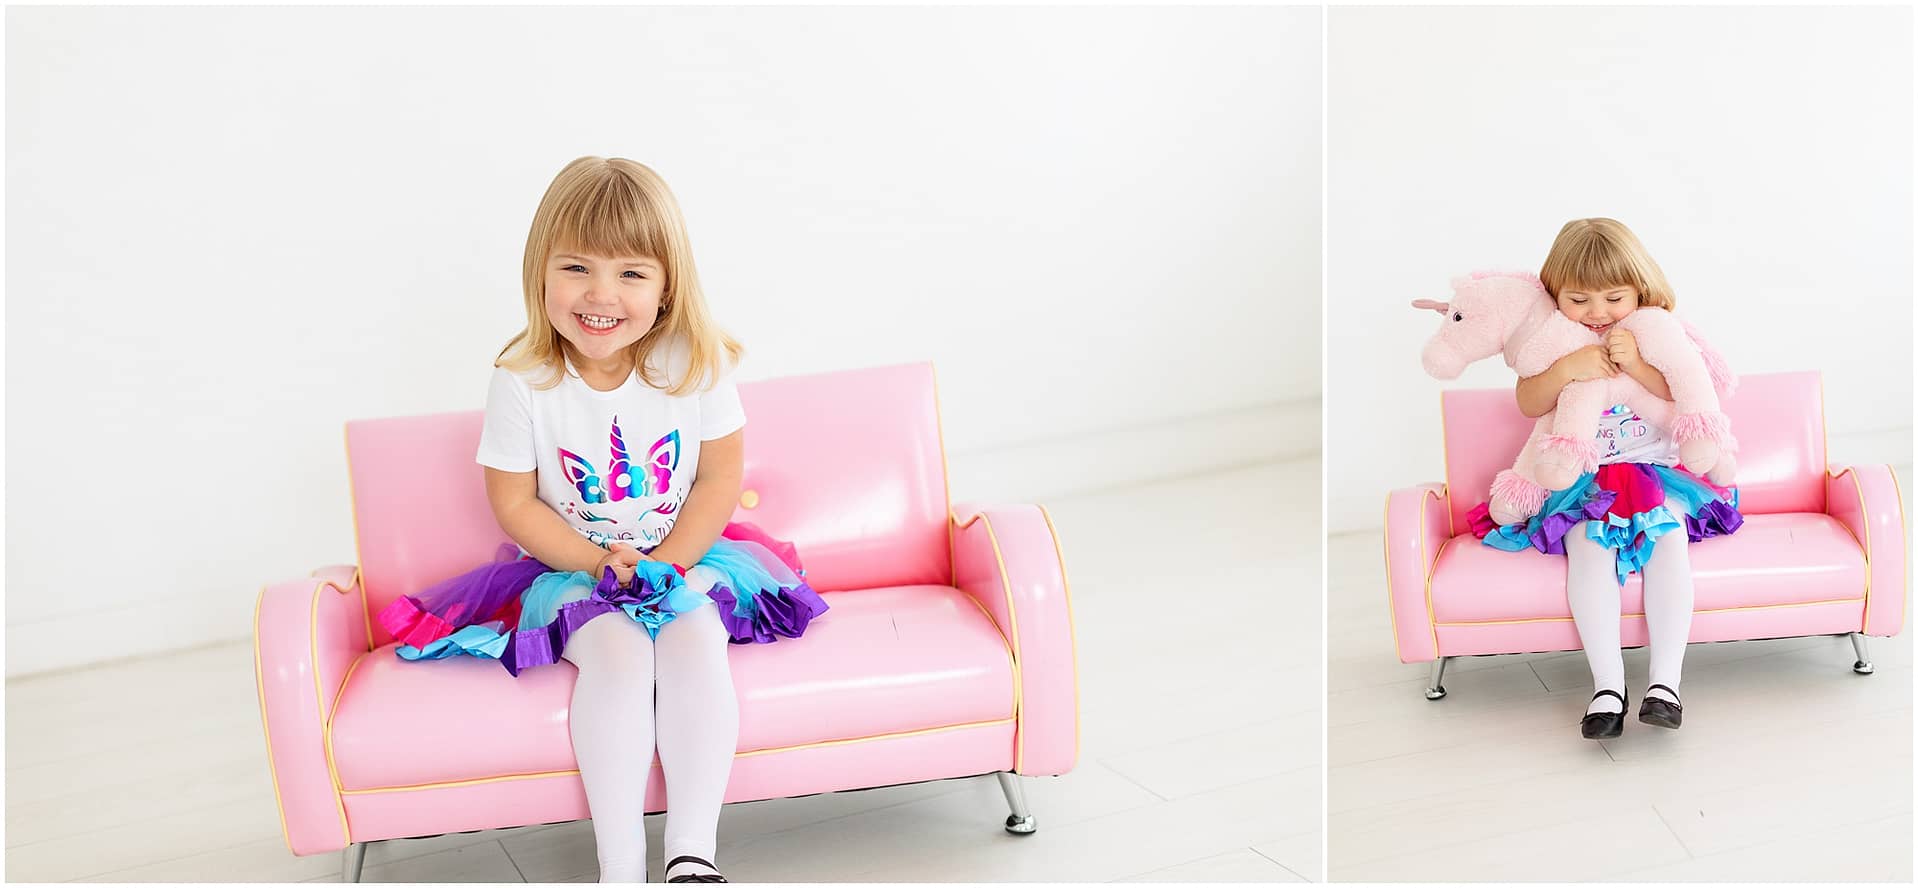 Little girl sits on pink couch while clutching a unicorn plush. Photo by Tiffany Hix Photography.